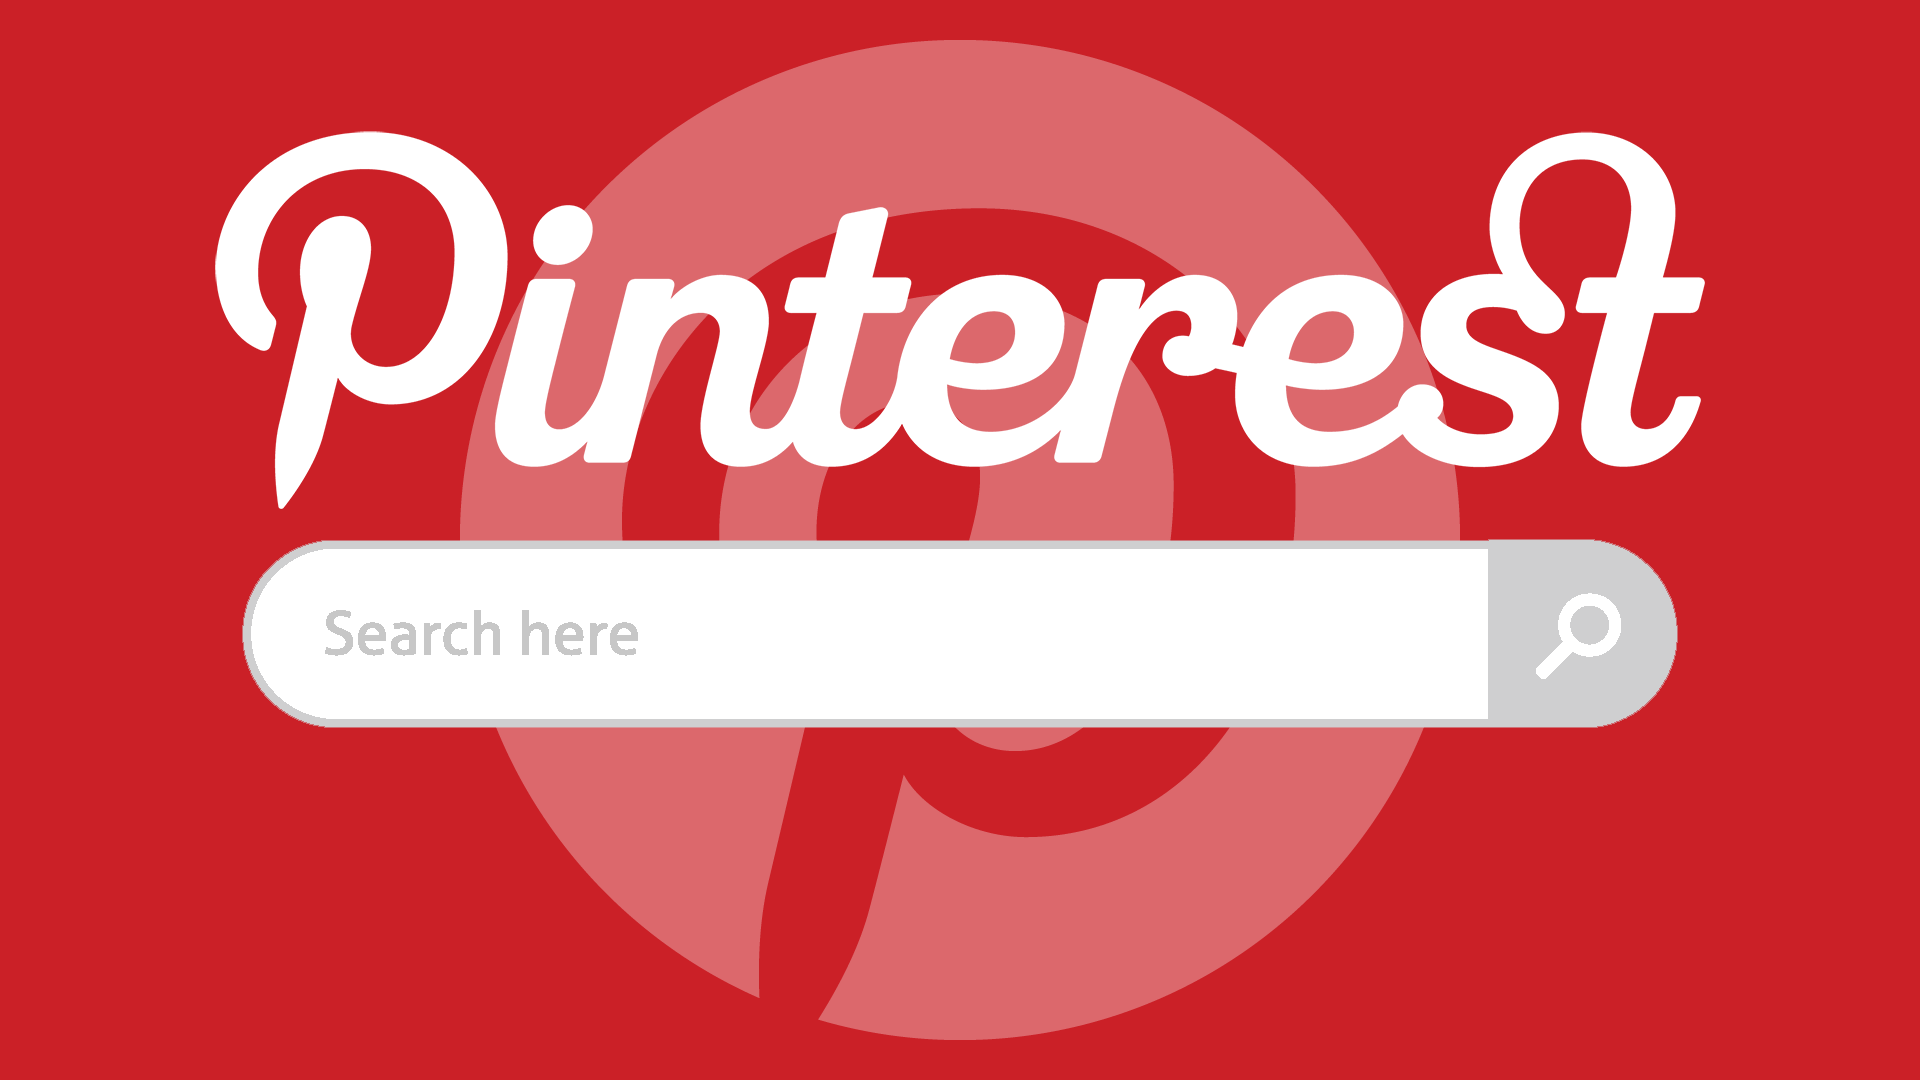 Pinterest App Logo - Pinterest's Lens app turns your phone's camera into a search bar ...